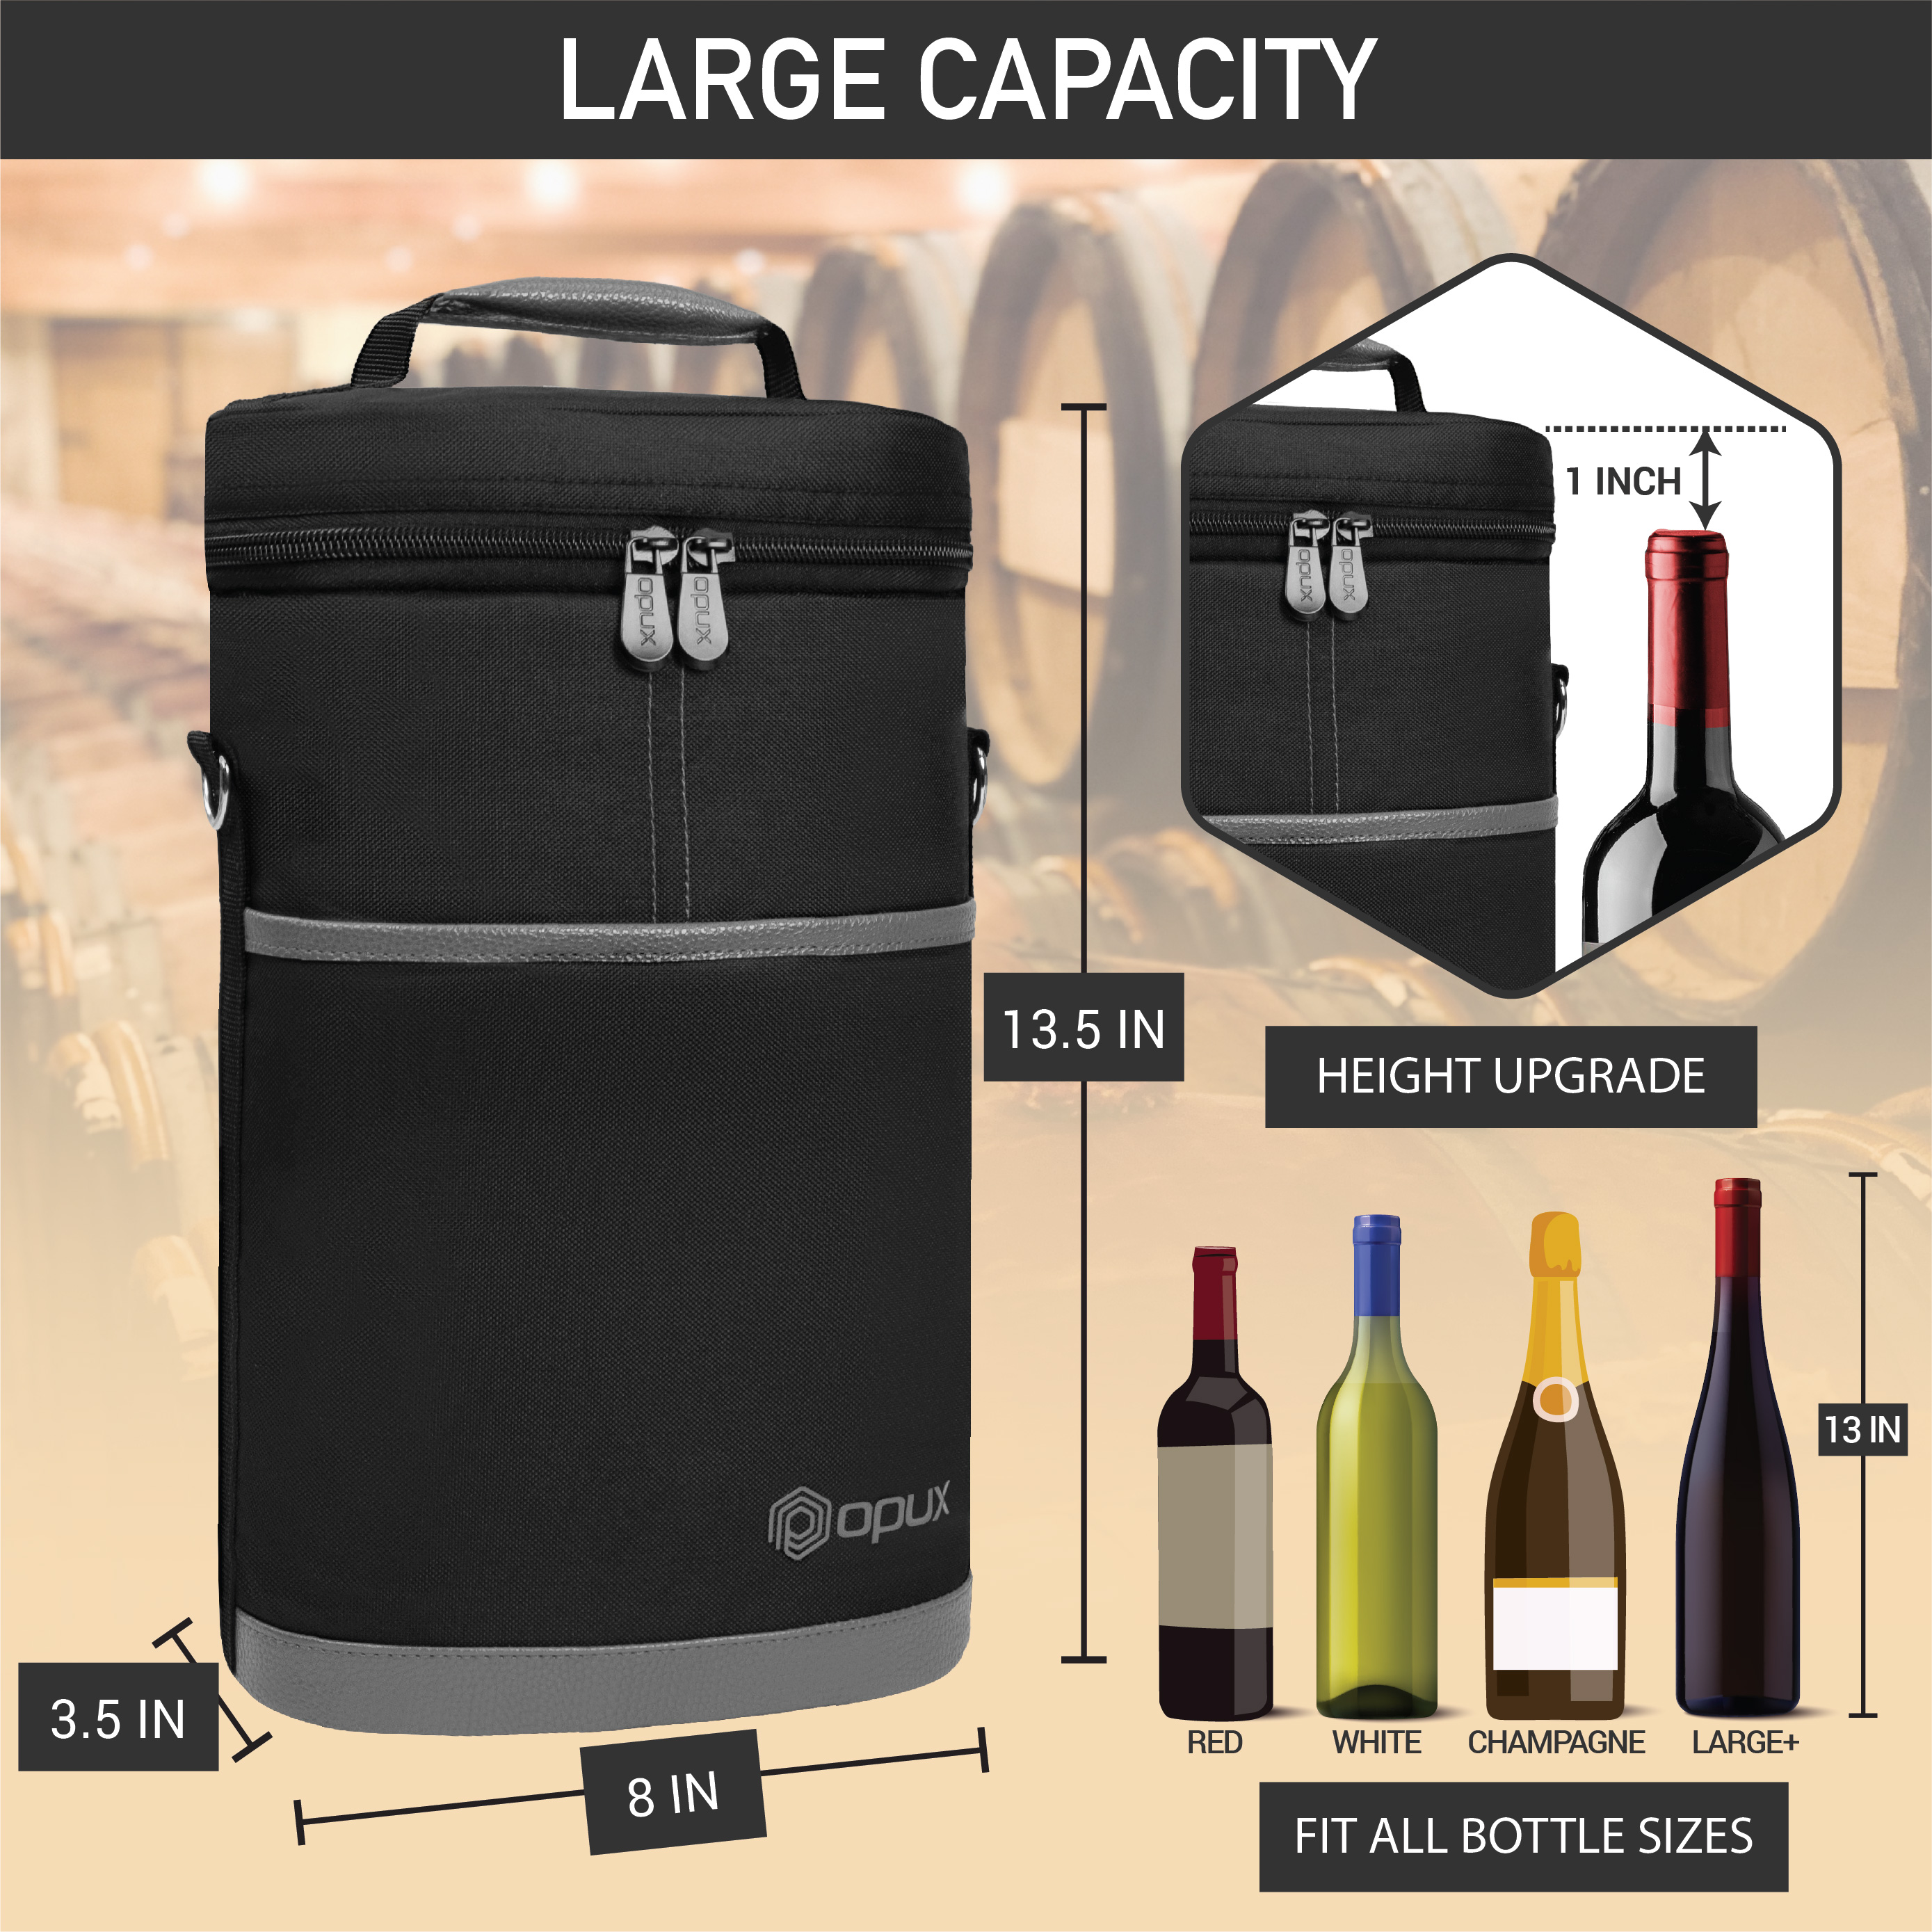 OPUX 2 Bottle Wine Carrier Tote, Insulated Leakproof Wine Cooler Bag, Wine Travel Bag Tote for Picnic BYOB Beach, Portable Wine Bottle Carrying Case, Gift for Wine Lover Women Men Christmas, Dark Grey - image 3 of 9